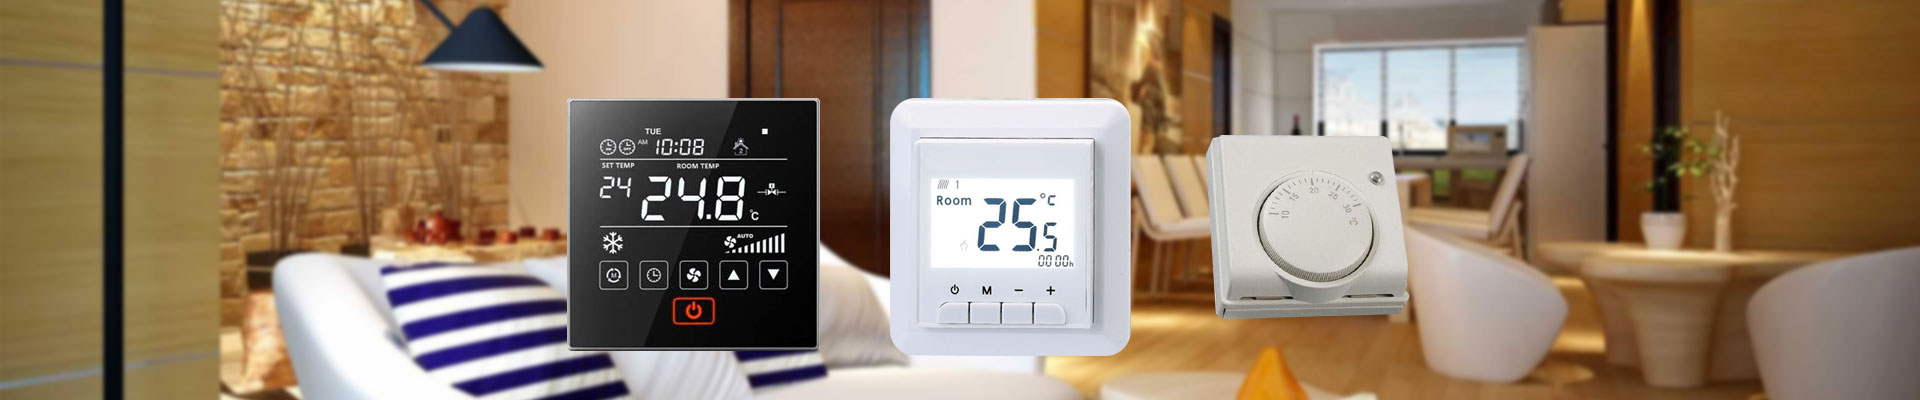 C17 Smart Touch Screen Programming Heating Thermostat with Wi-Fi, 3A, 16A